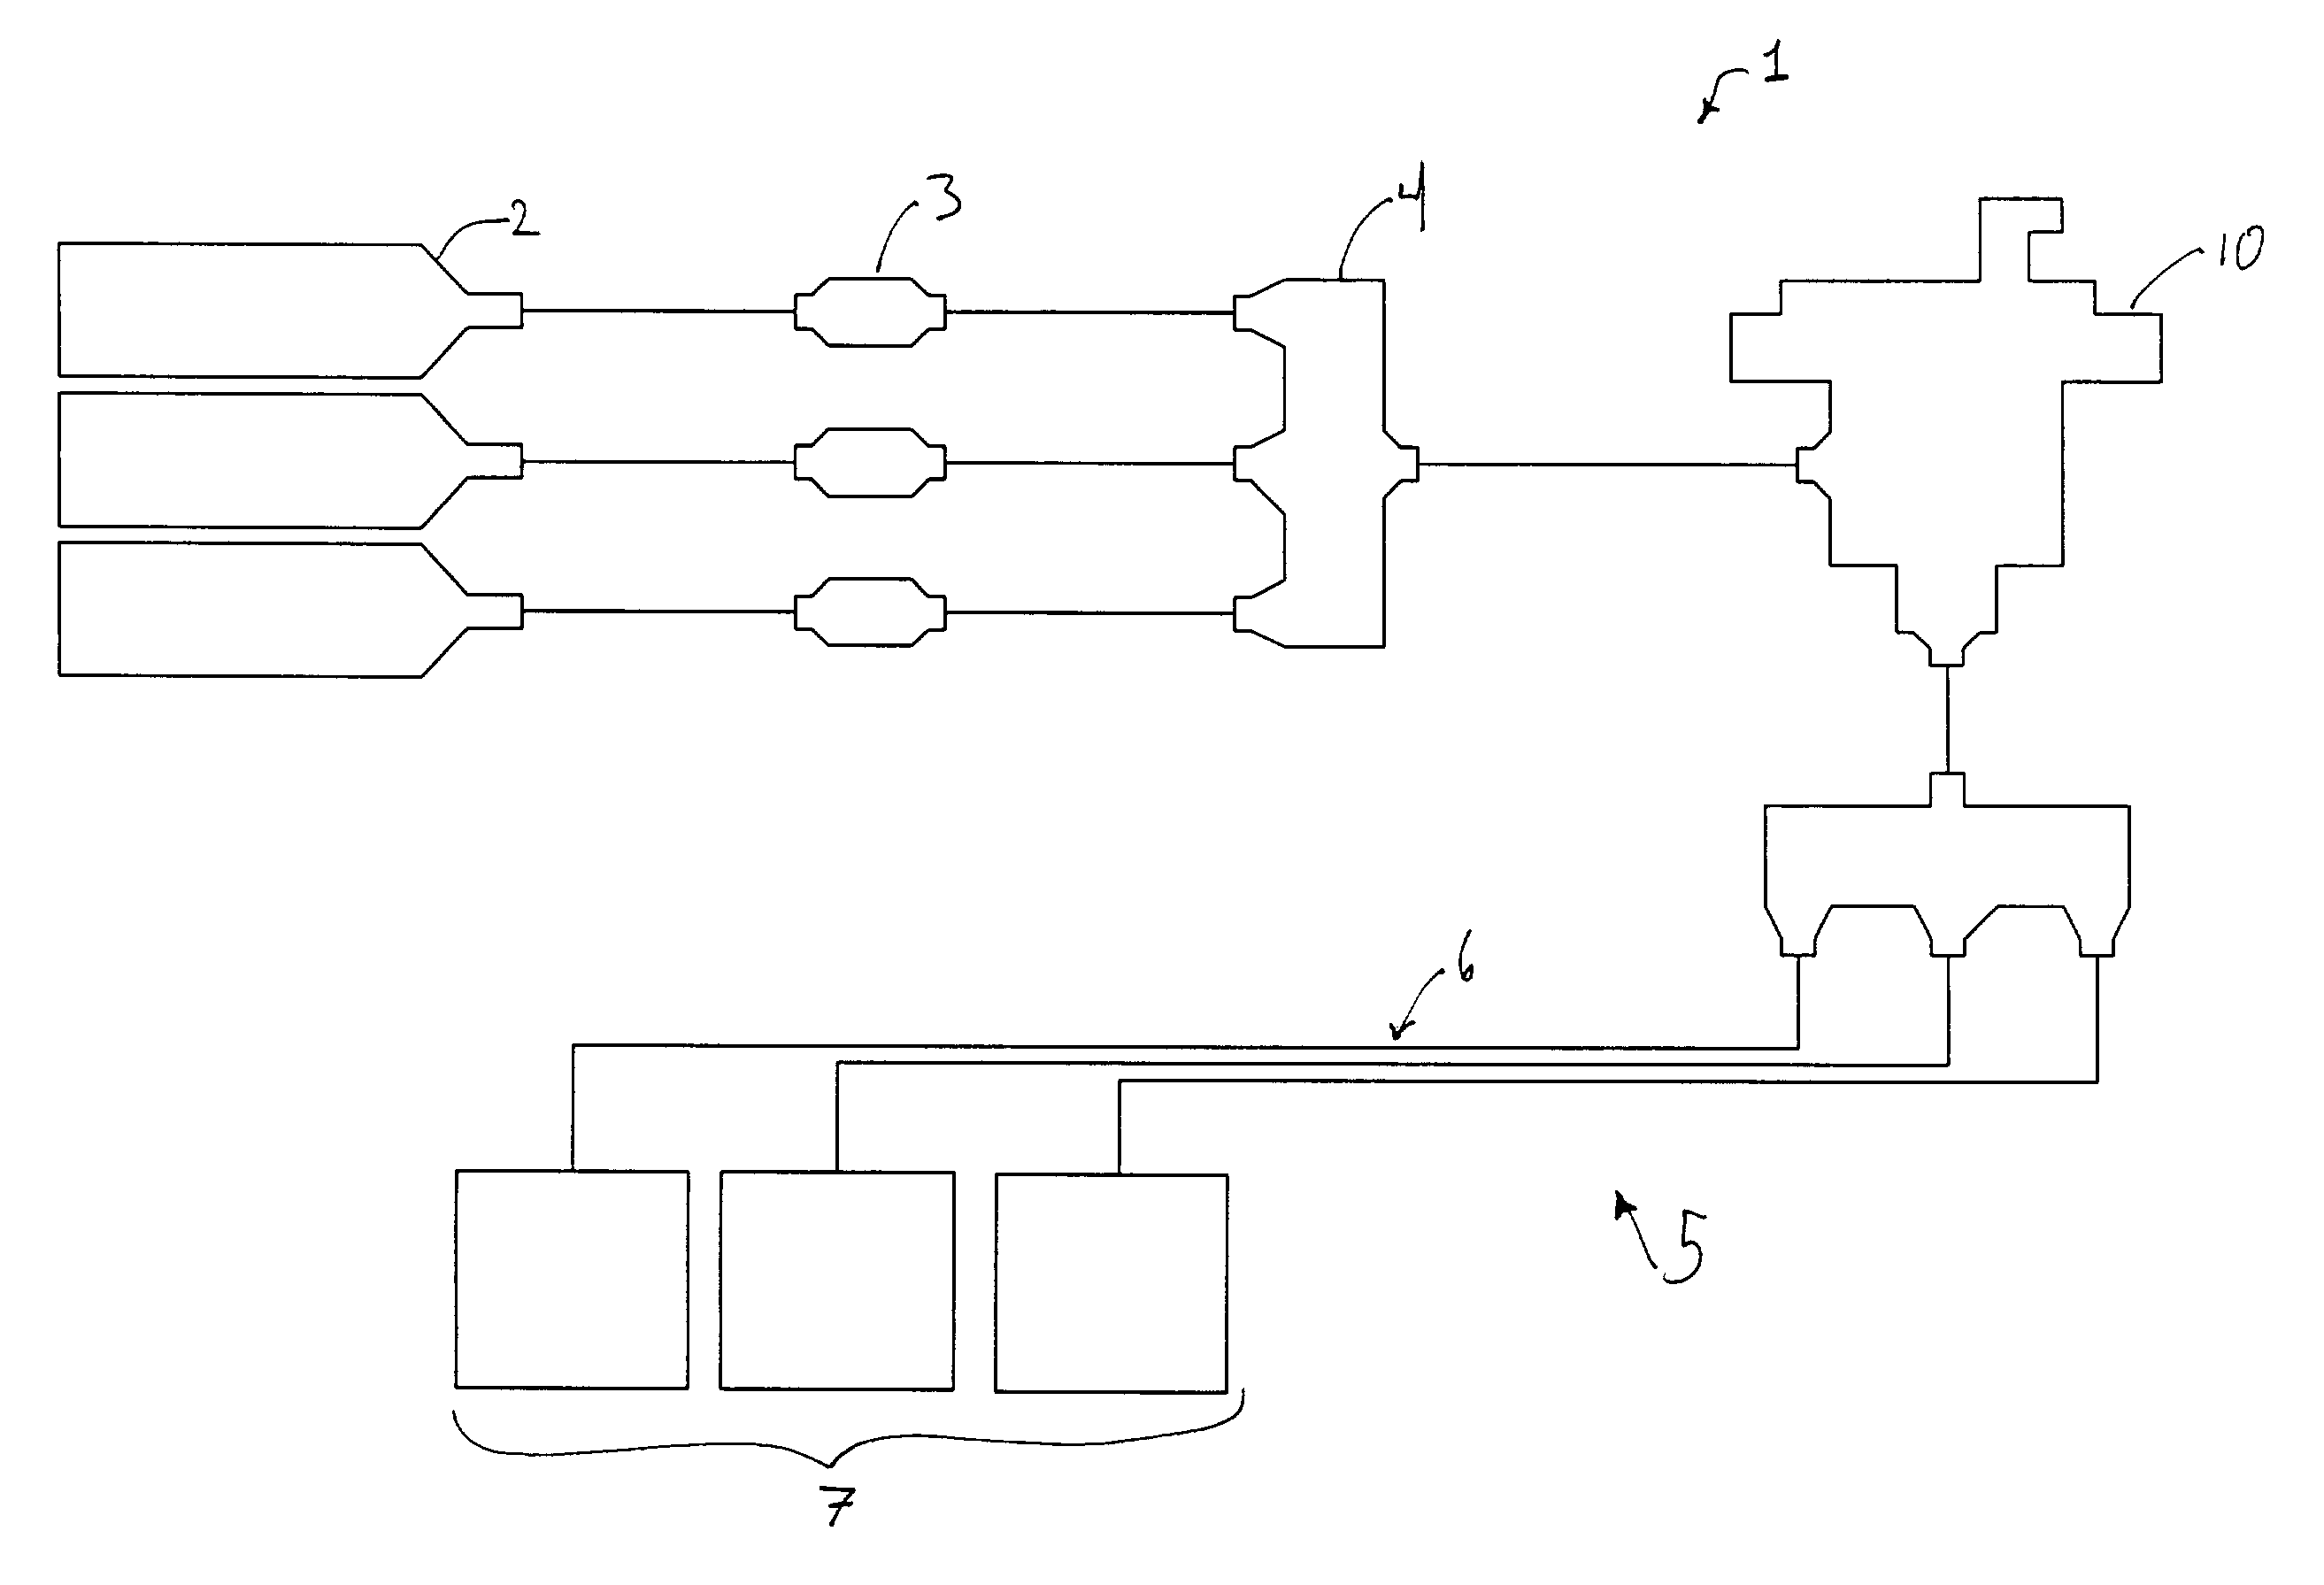 Oxygen supply system having a central flow control unit